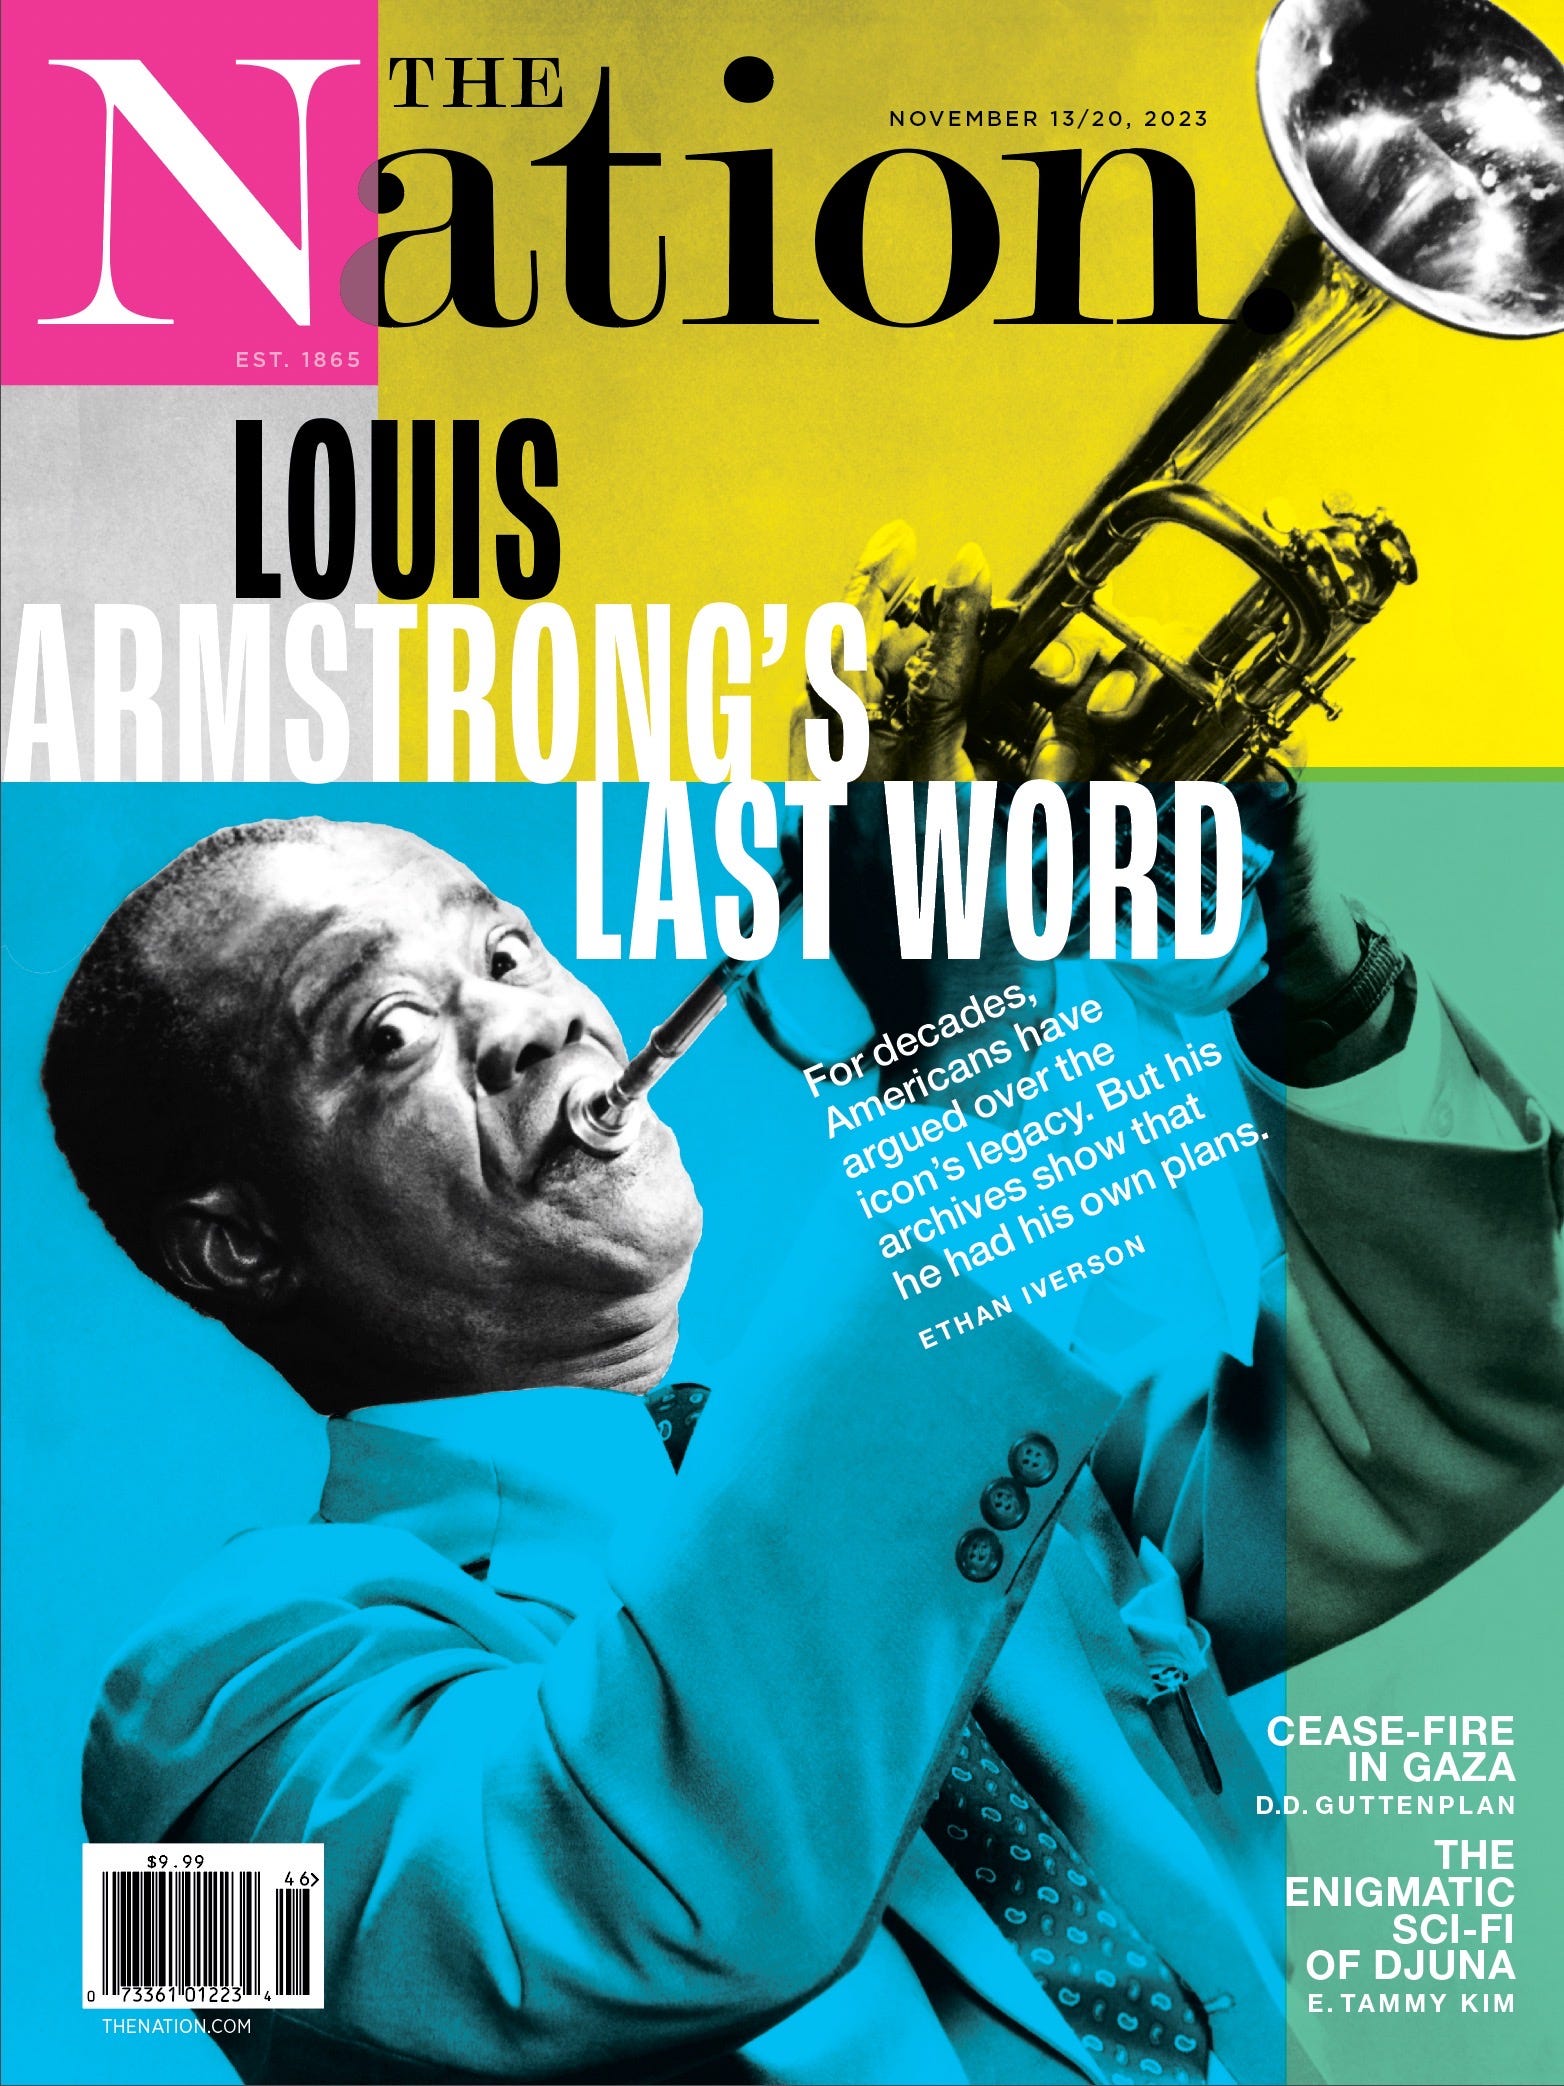 TT 316: Cover Story! LOUIS ARMSTRONG'S LAST WORD in The Nation